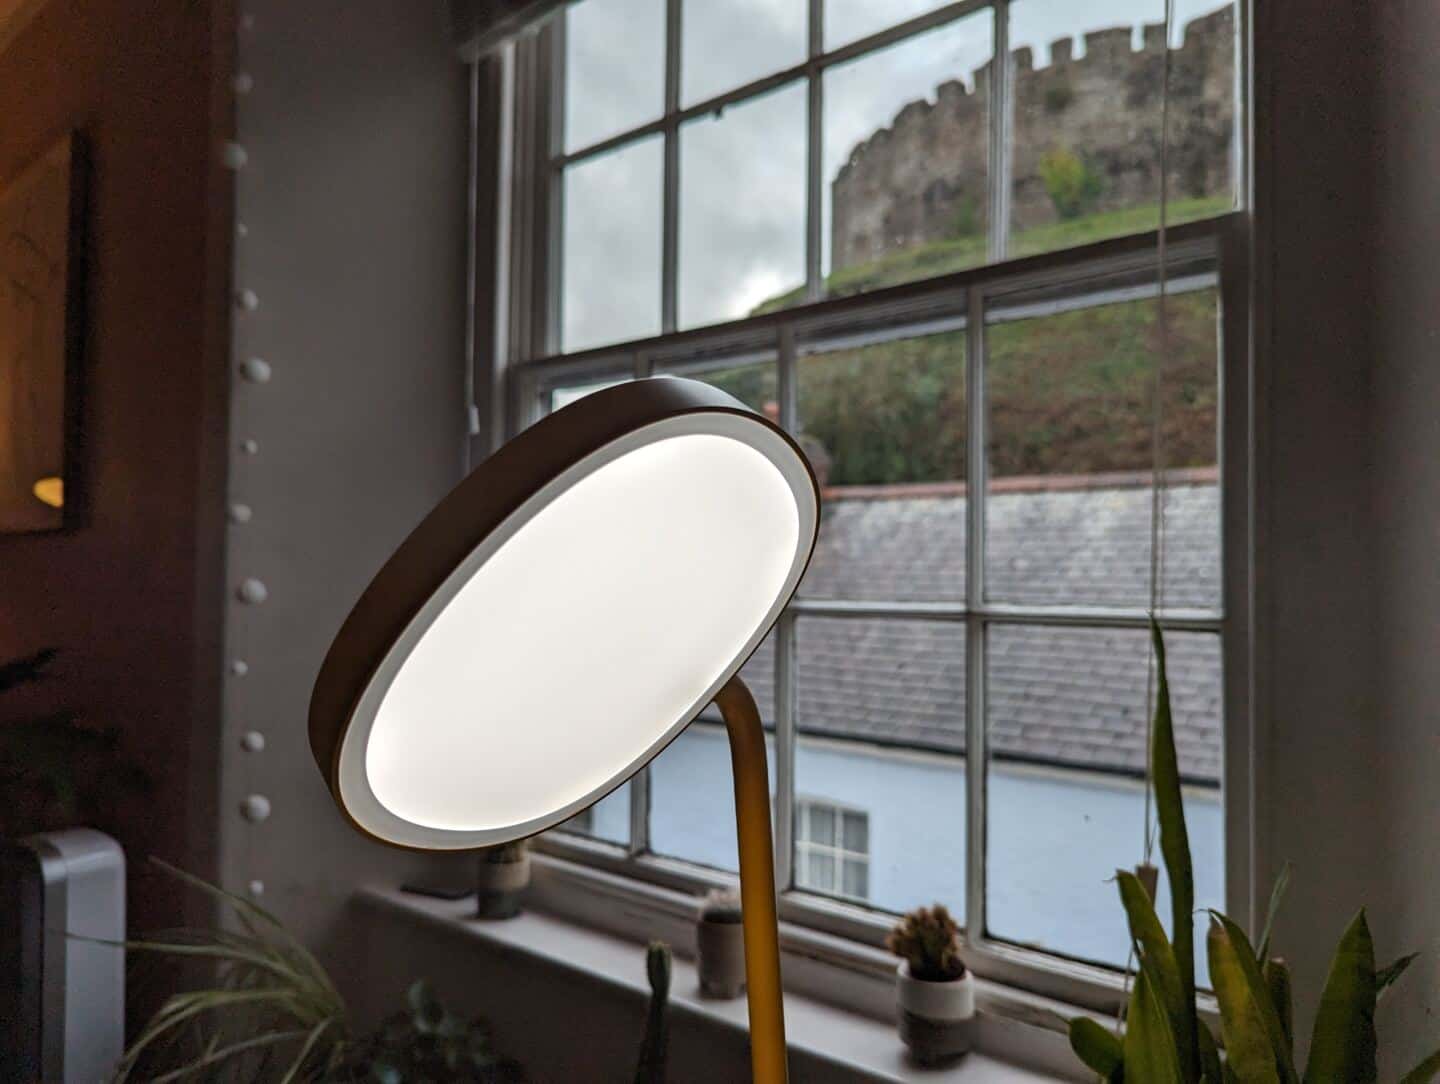 The head of the Lumie task Lamp rotated to 45 degrees